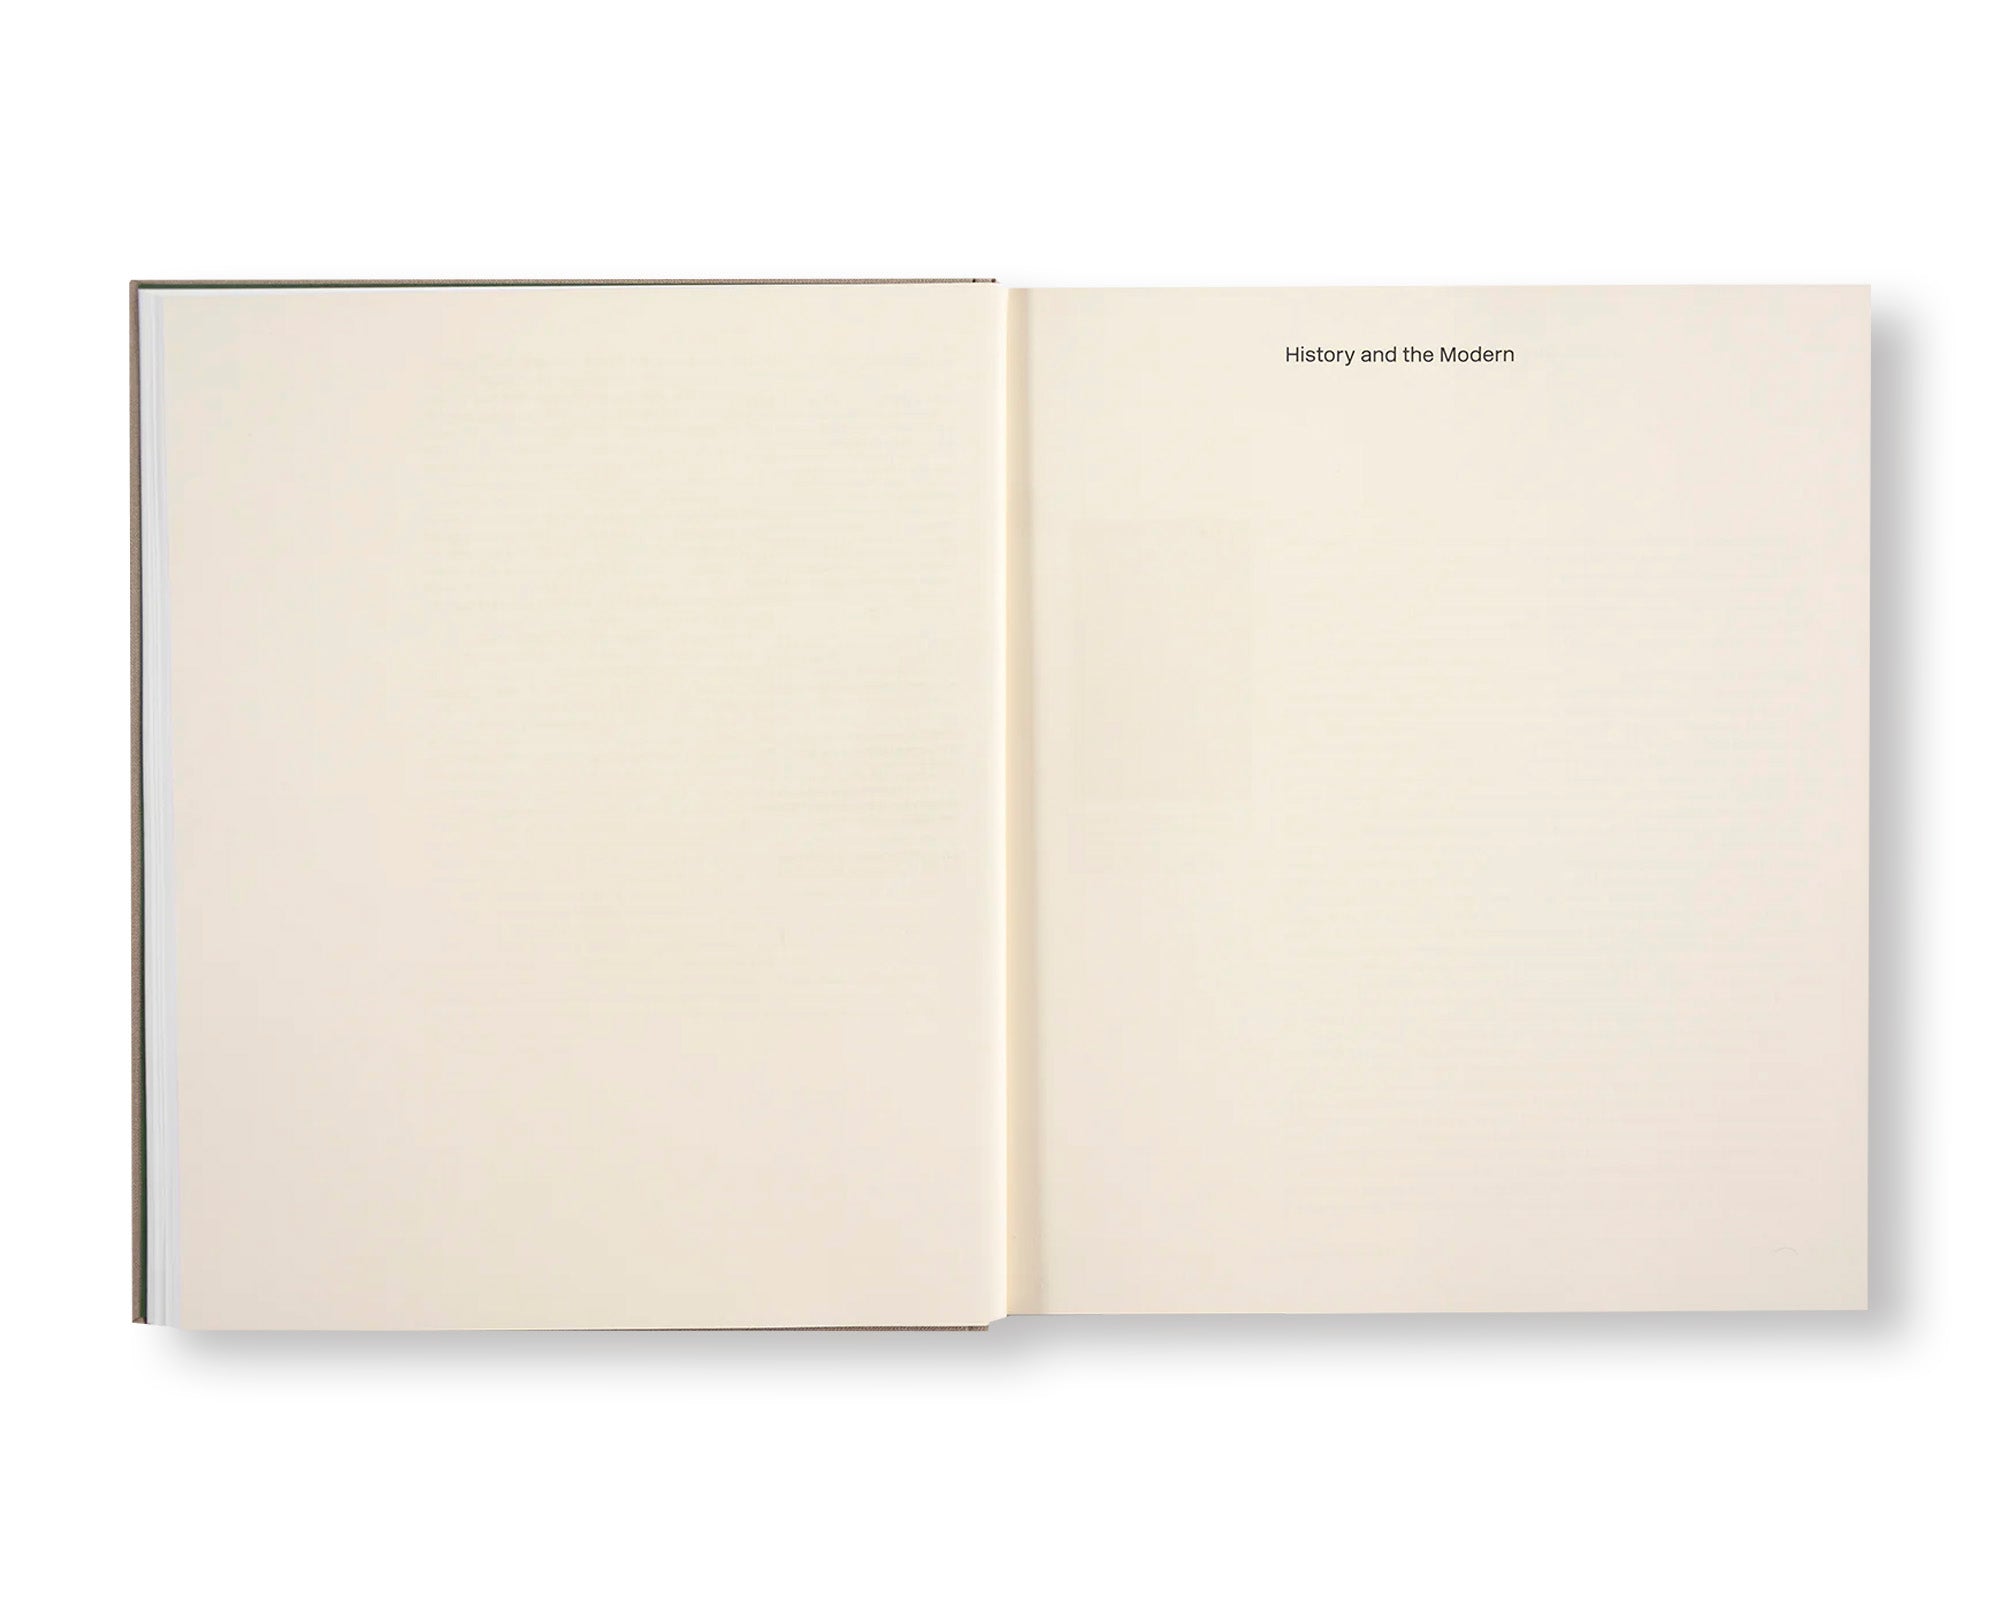 COLLECTED WORKS: VOLUME 2 2000–2012 by Caruso St John